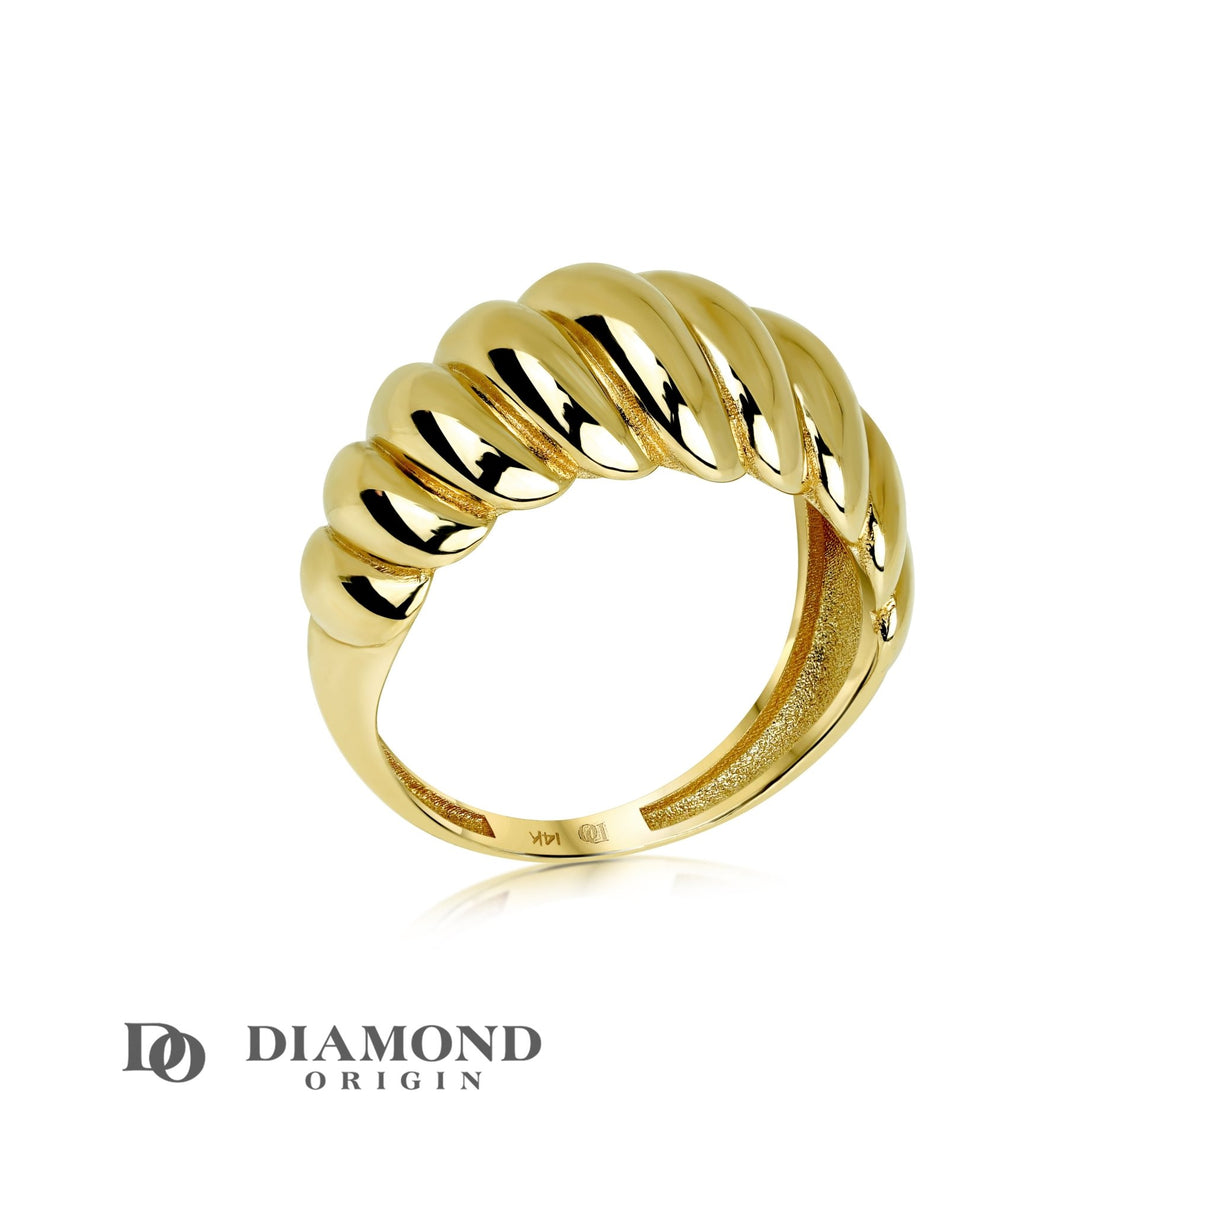 Adorned with the distinguished Diamond Origin mark, this ring encapsulates the brand's dedication to sourcing the highest quality materials and crafting beautiful, lasting pieces. A true testament to our fine craftsmanship, it encapsulates style, luxury, and elegance in every detail, gold rings, 14K gold ring, stackable gold ring,